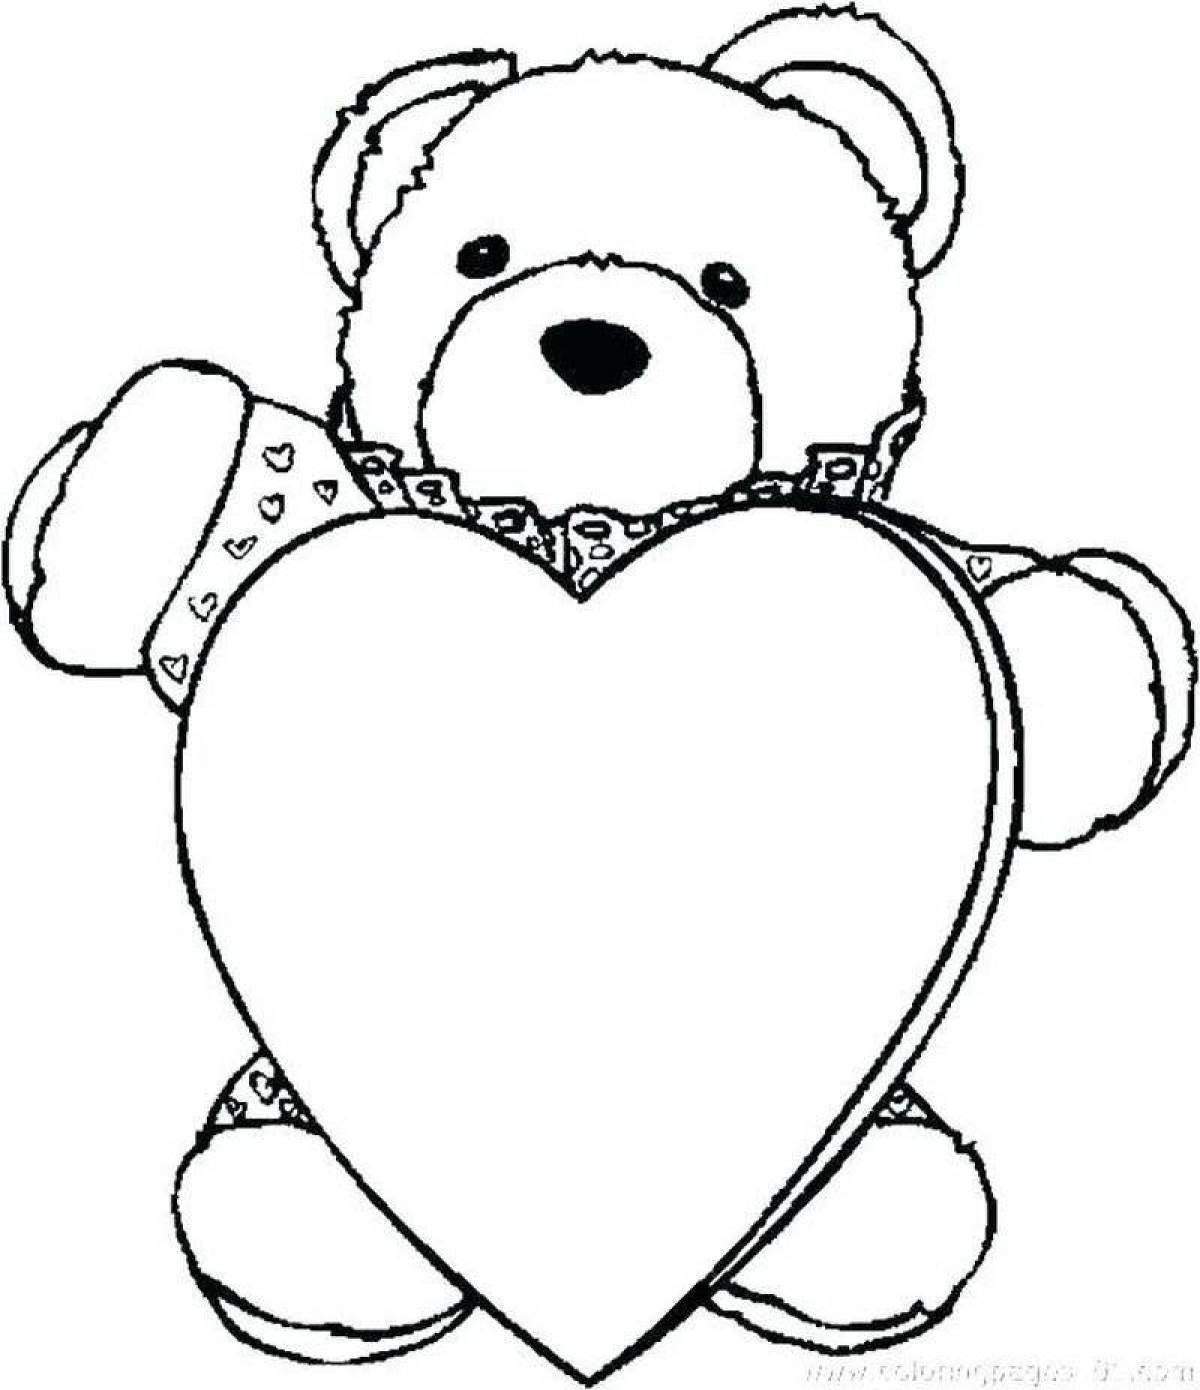 Smiling bear with heart coloring page